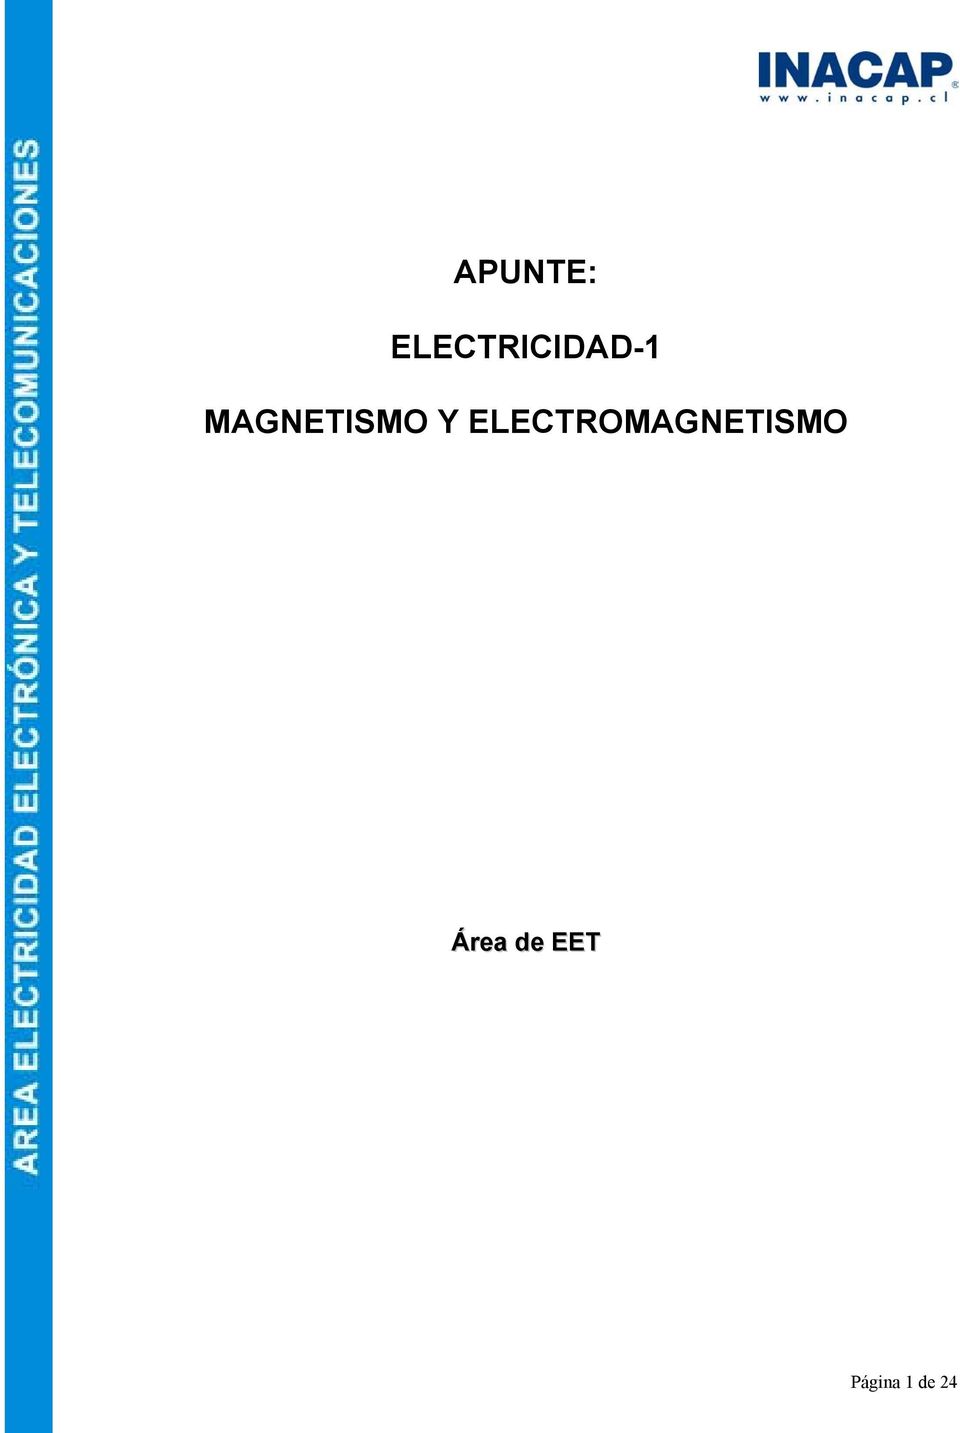 MAGNETISMO Y